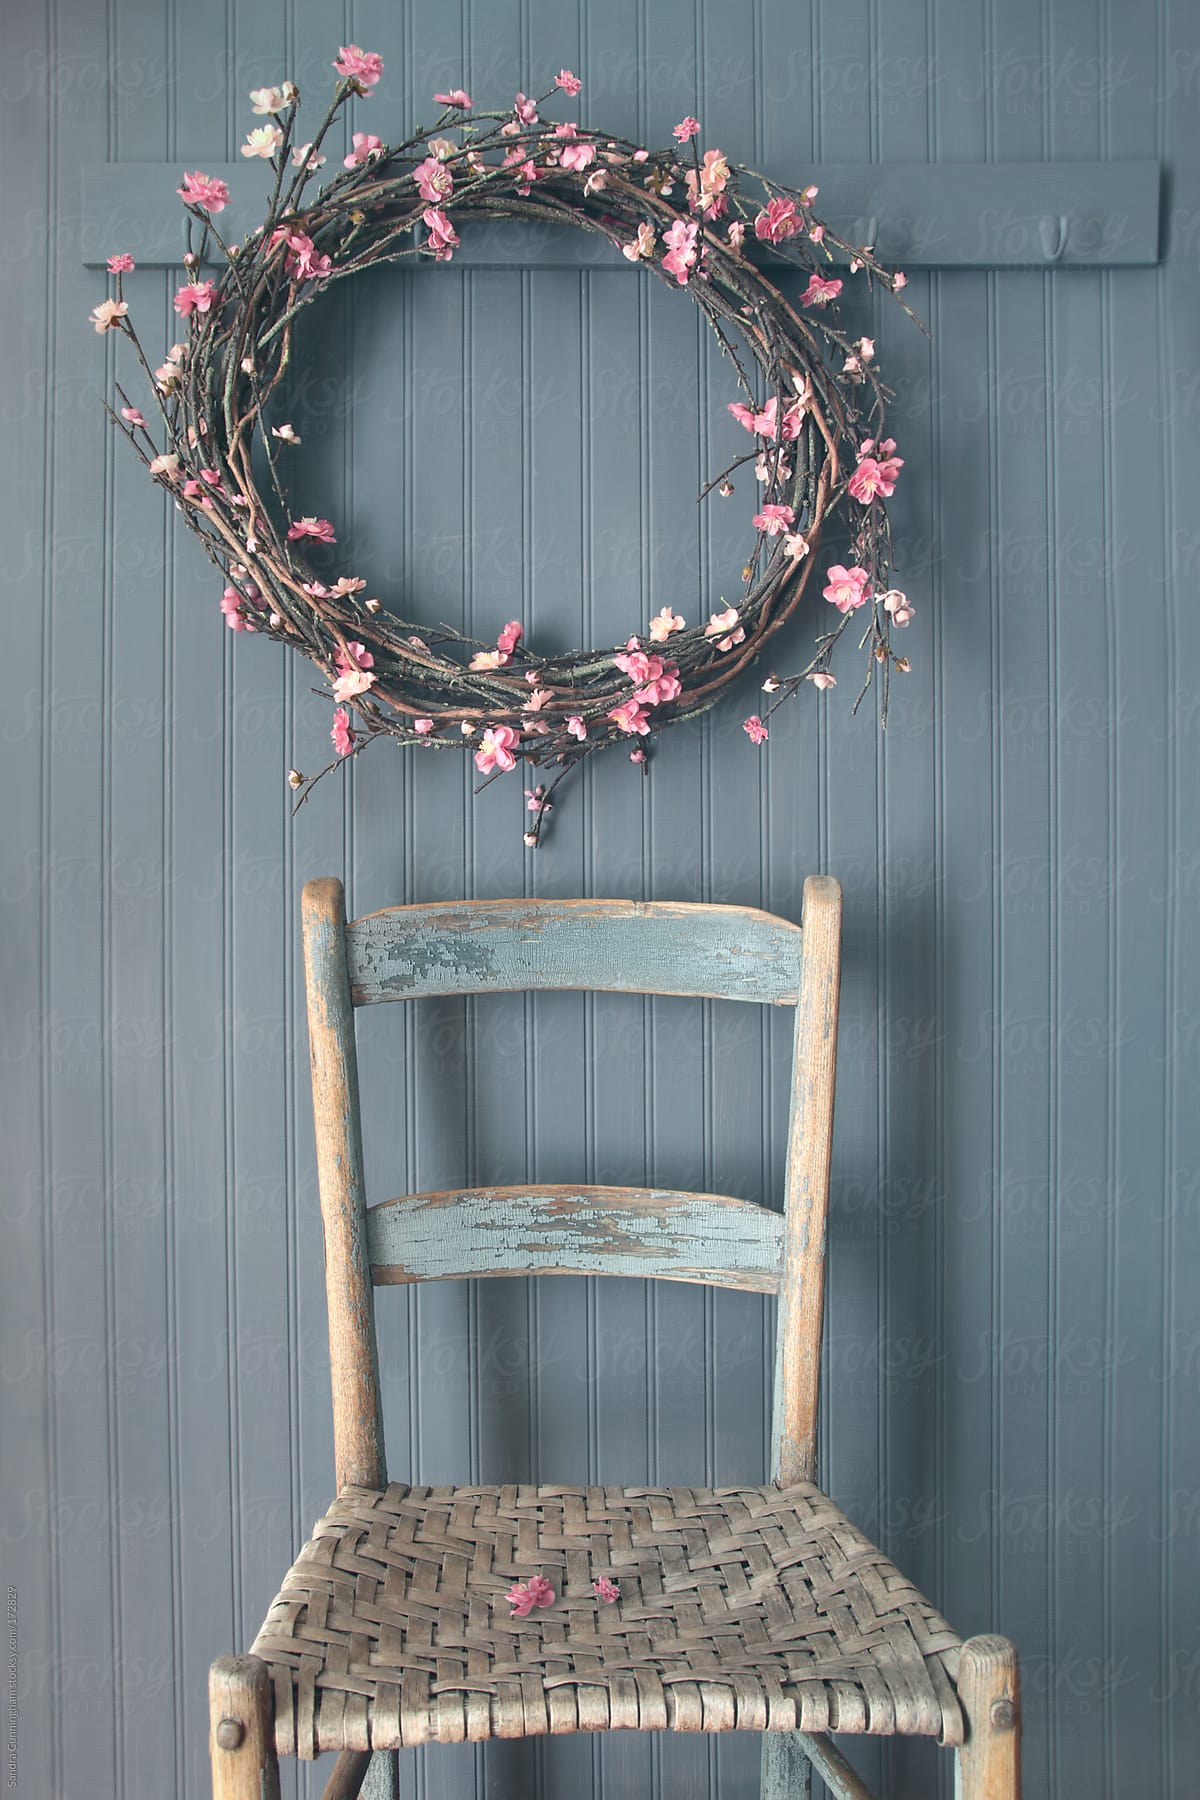 Apple blossom wreath hanging on coat hook with chair